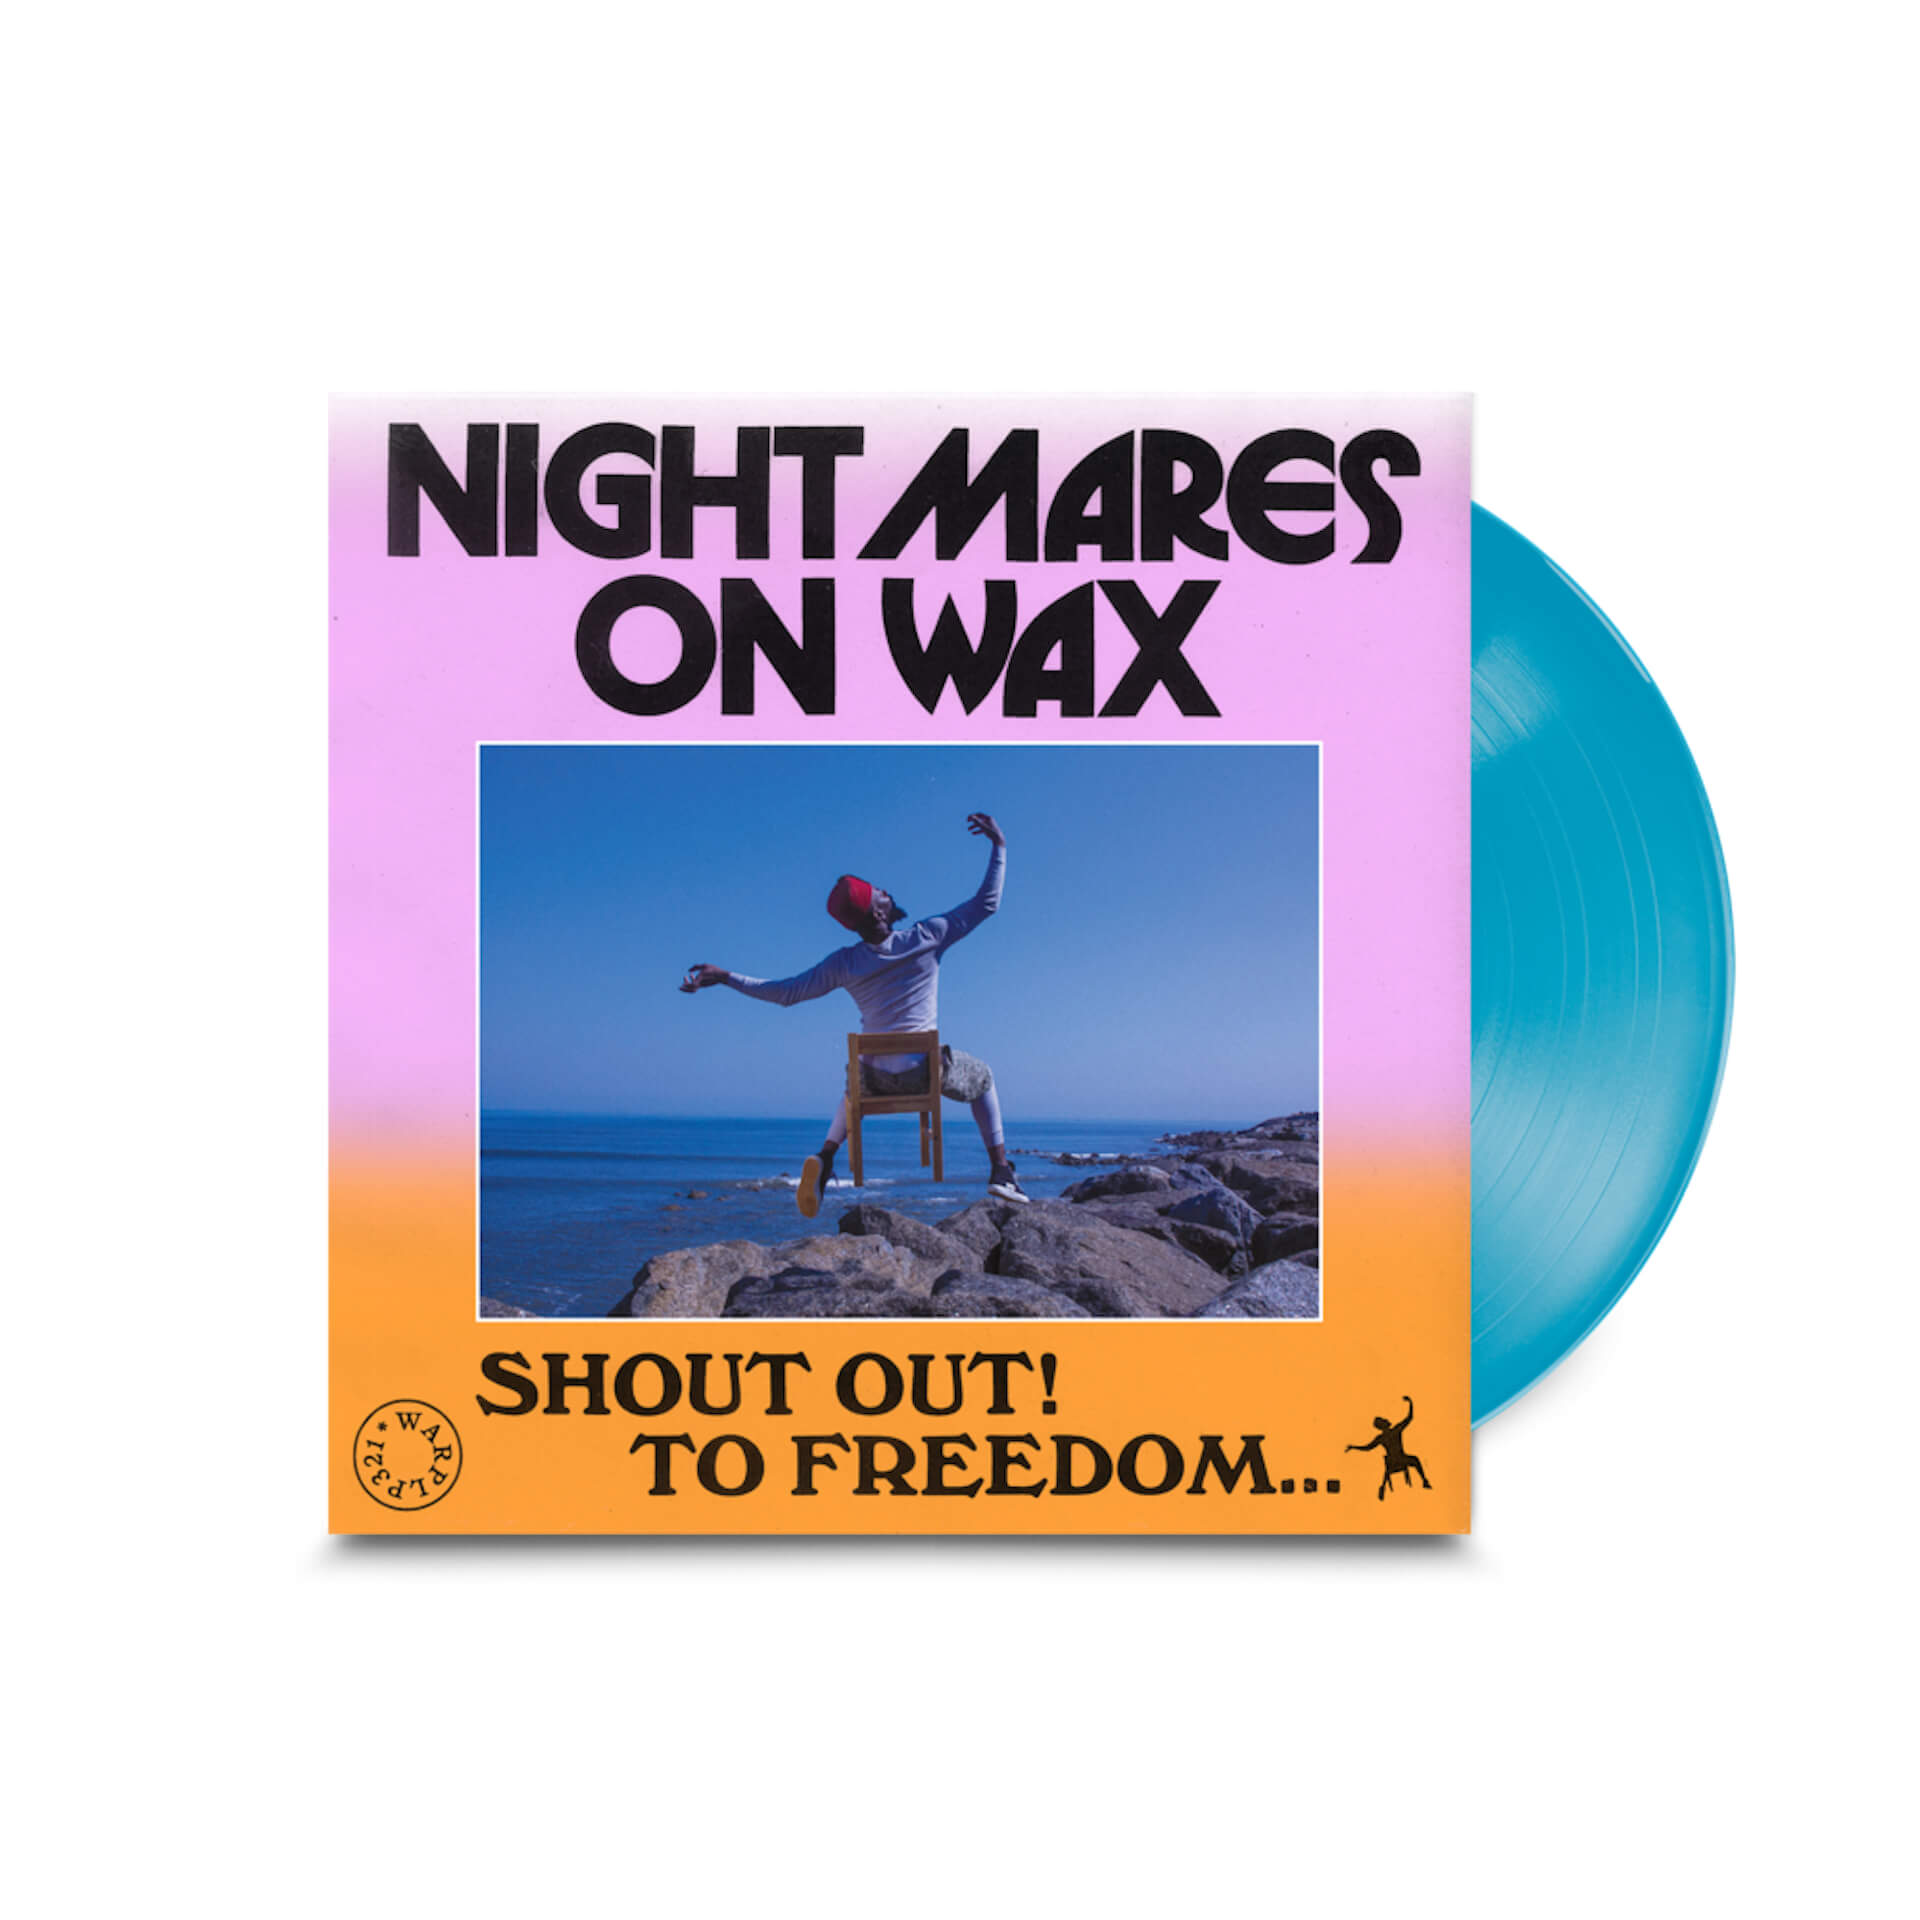 Nightmares On Waxの最新作『Shout Out！ To Freedom…』が本日リリース！収録曲7曲のパフォーマンス映像も解禁 music211029_nightmaresonwax_5